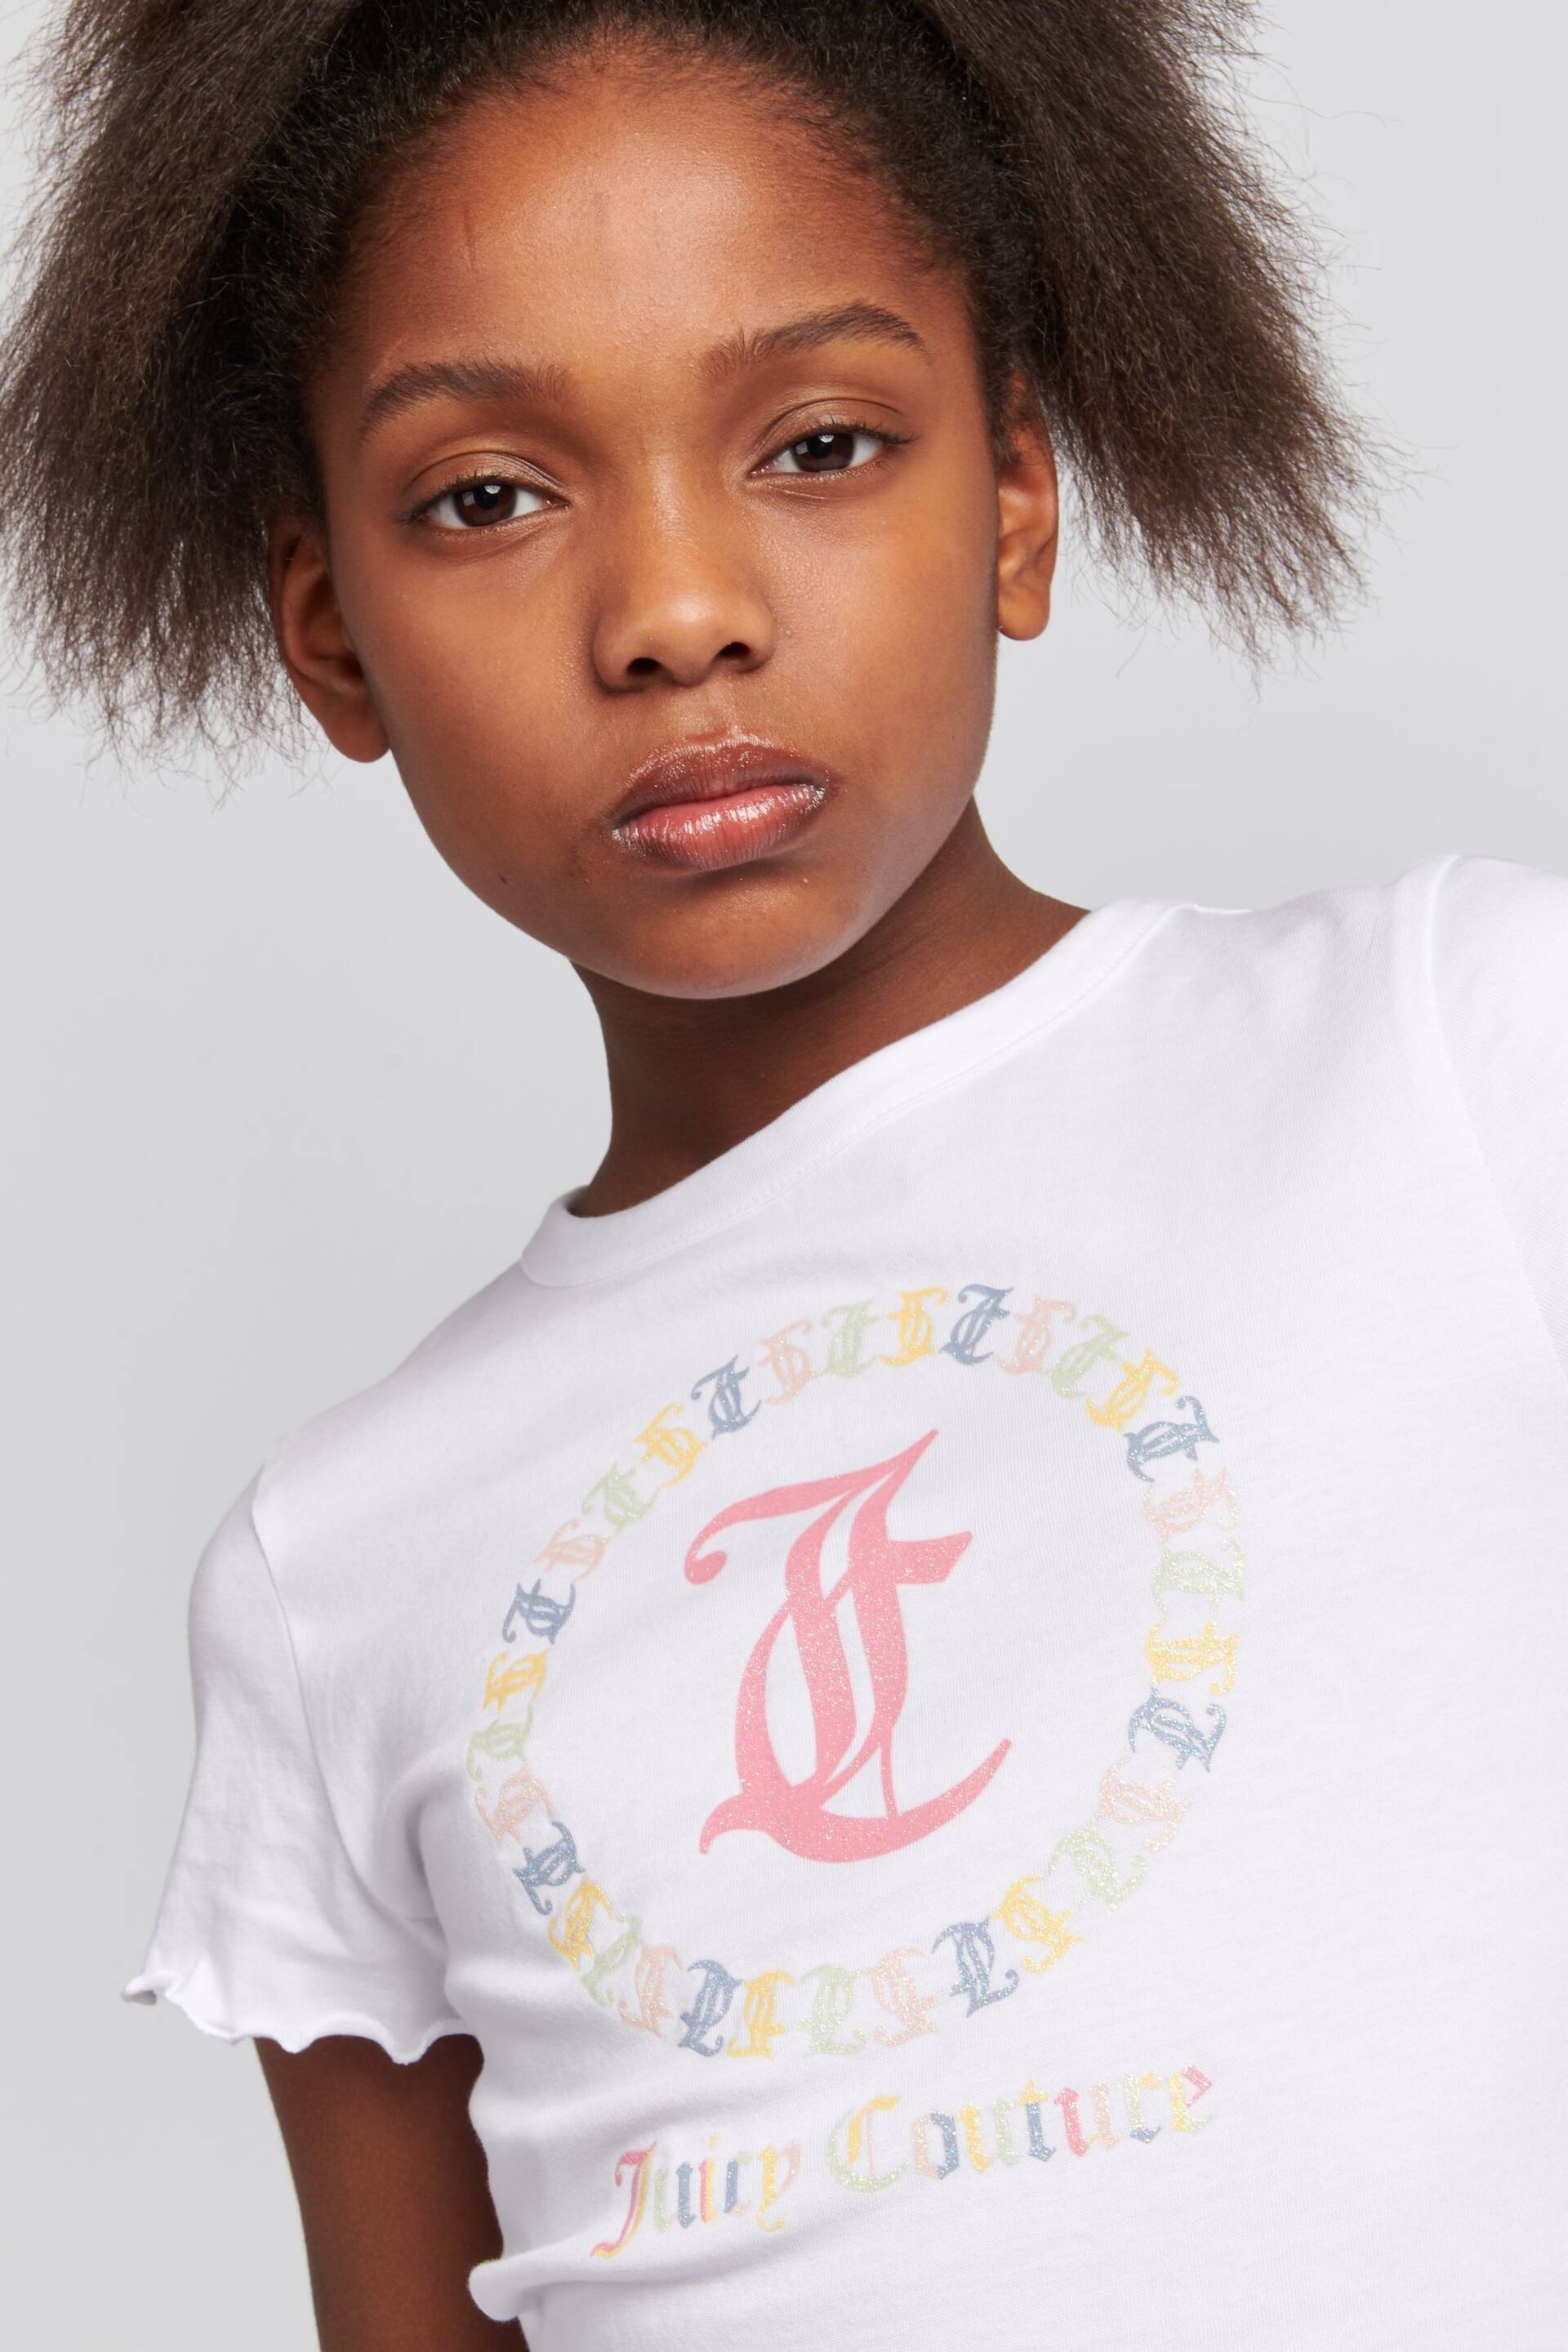 Juicy Couture Girls Lettuce Hem Cropped White T-Shirt - Image 5 of 5